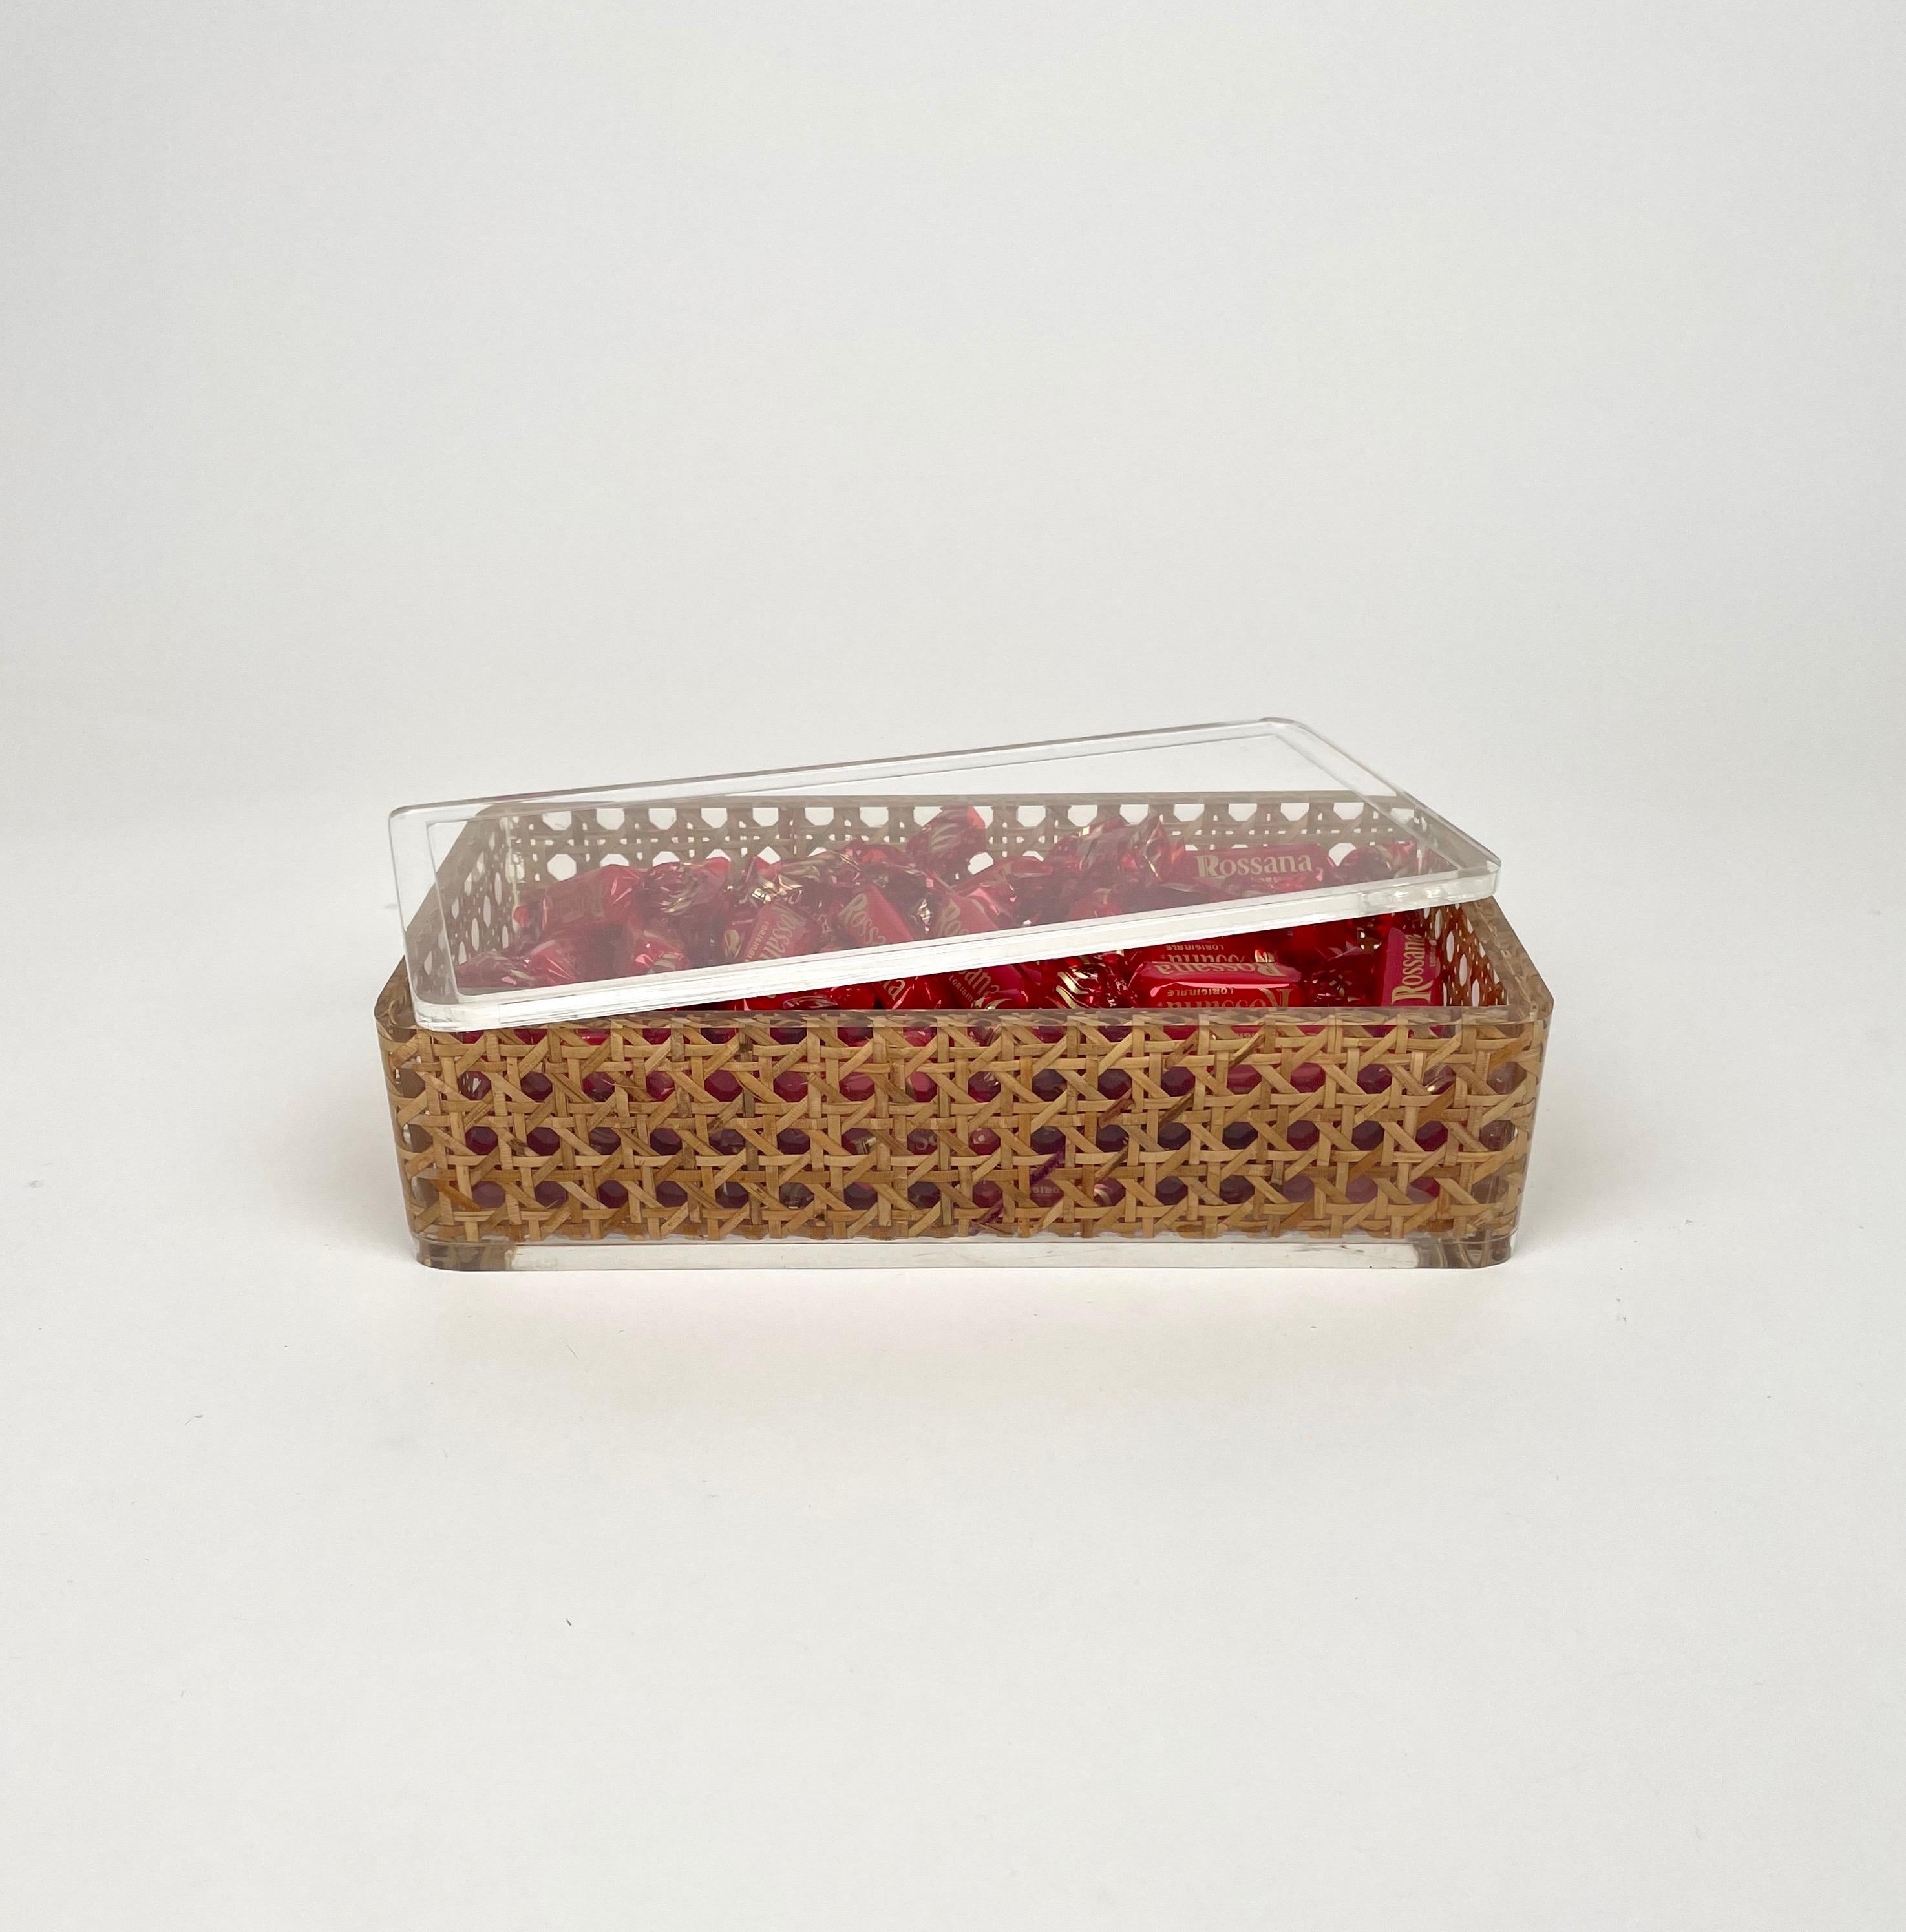 Wicker Rectangular Box Lucite and Rattan Christian Dior Home Style, Italy, 1970s